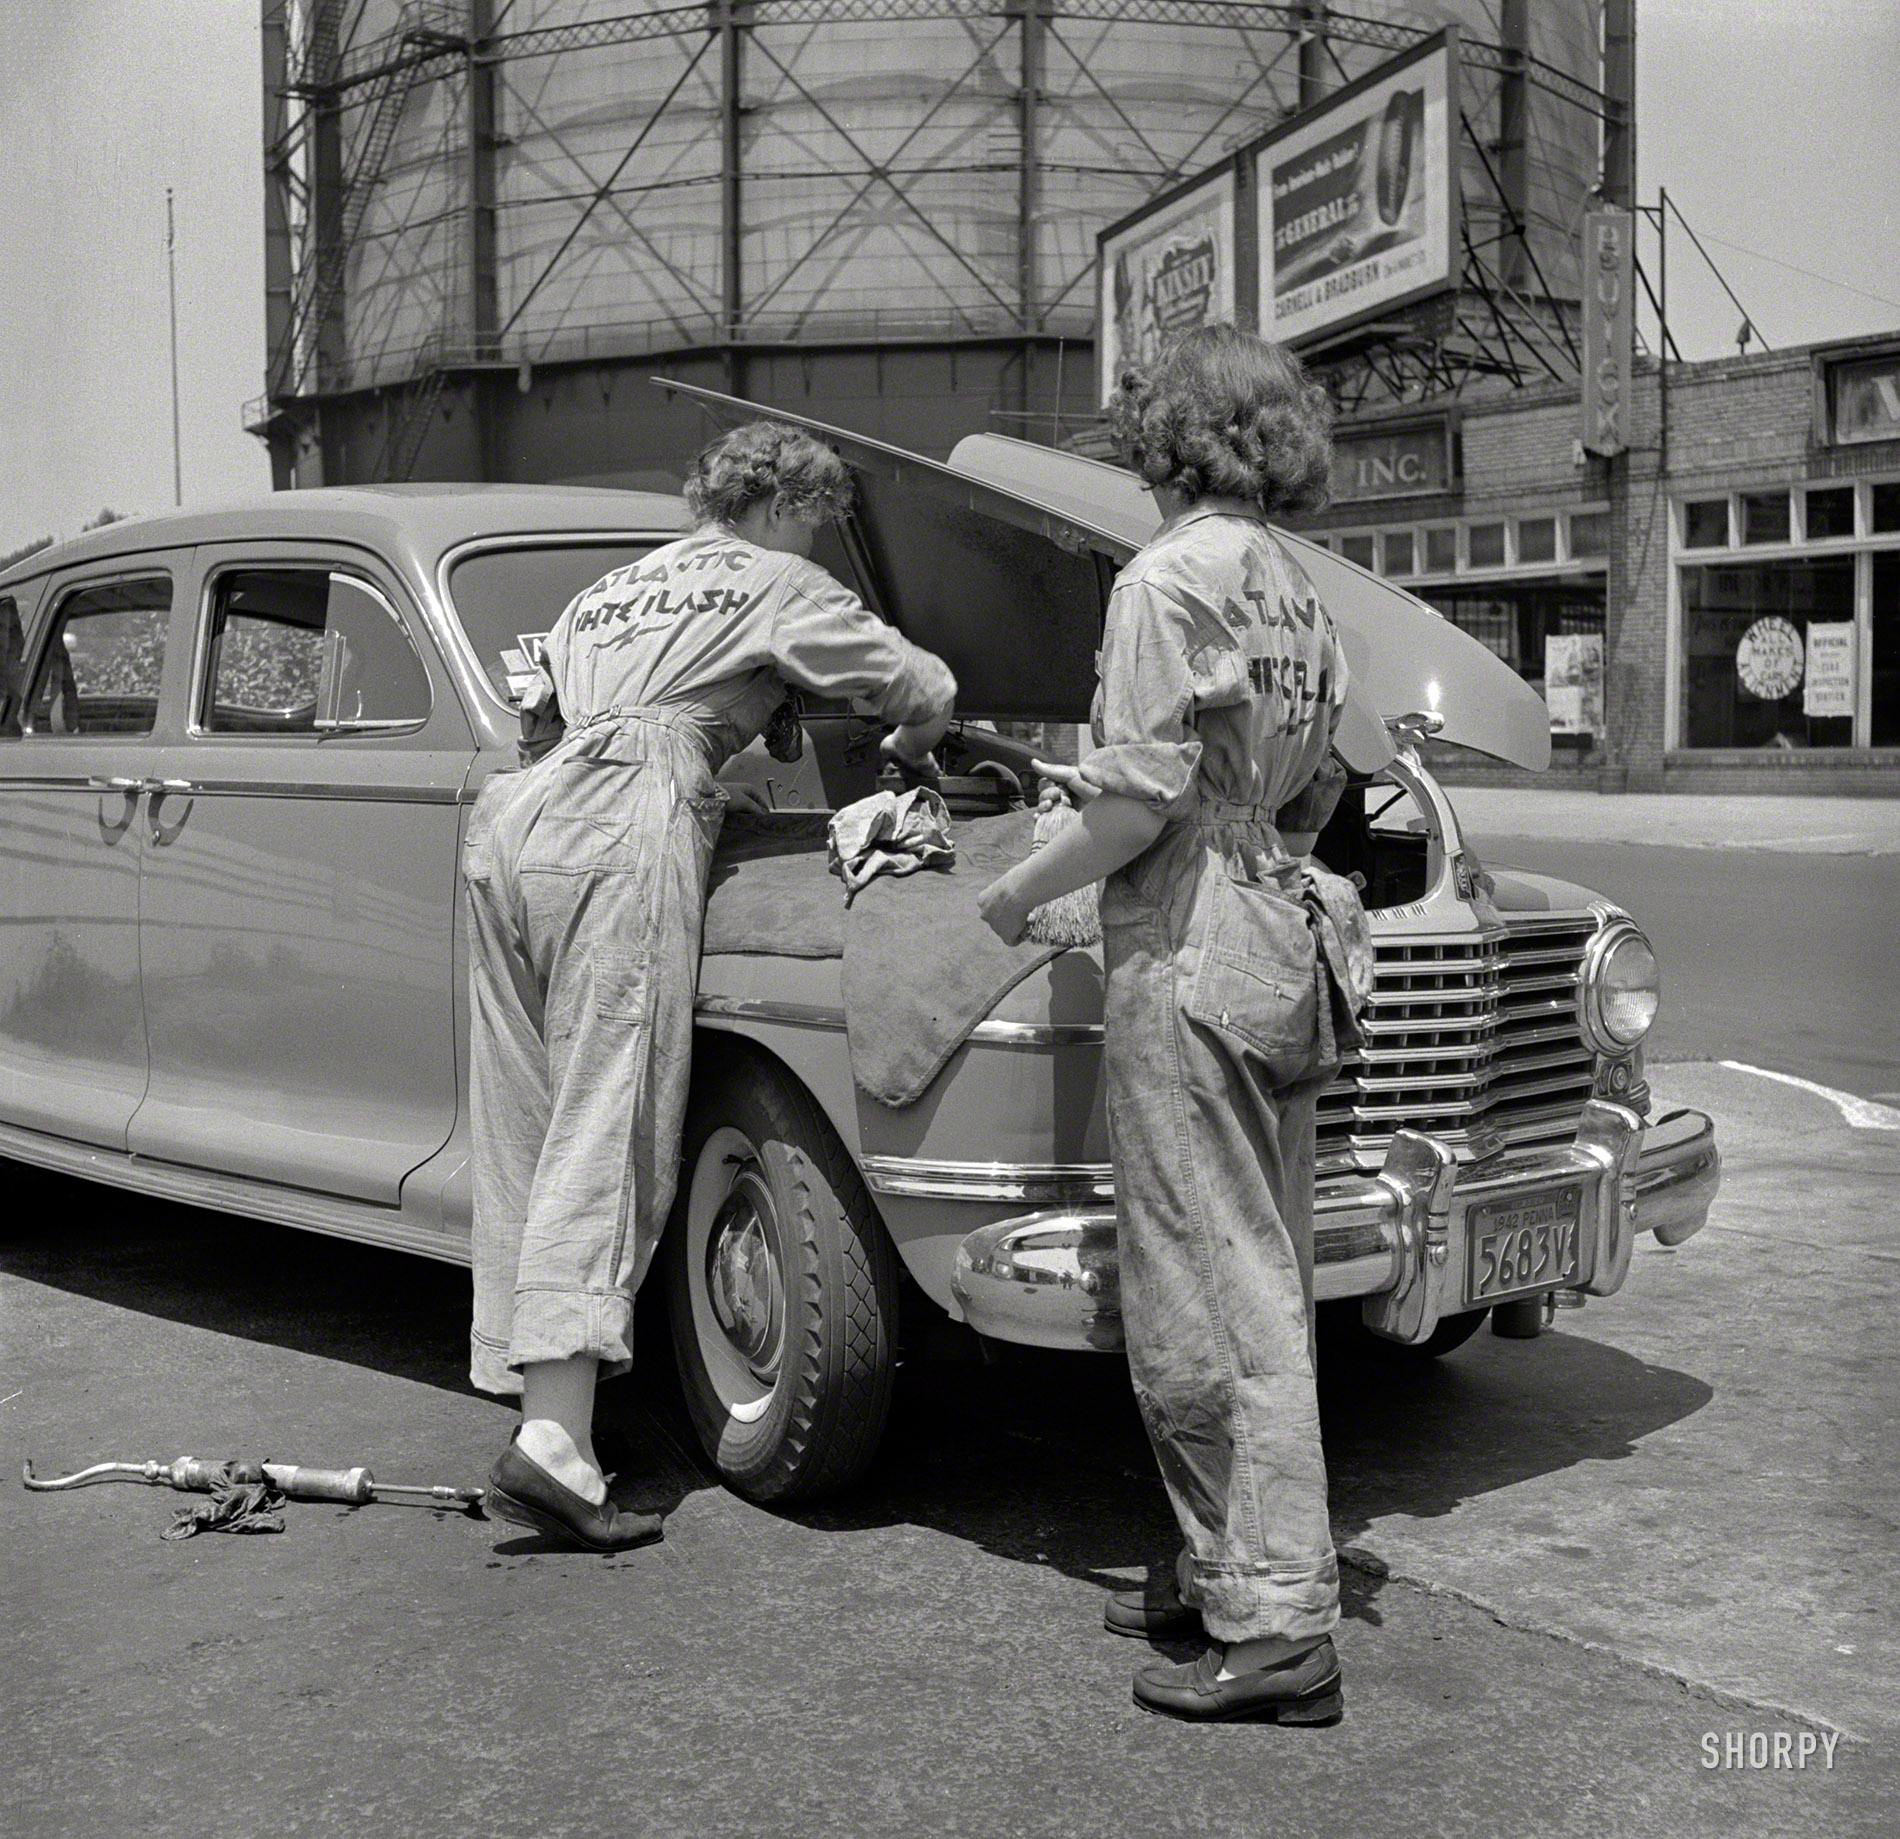 June 1943. "Philadelphia, Pennsylvania. Women garage attendants at the Atlantic Refining Company." The hard part here was figuring out that crazy clamshell hood. Photo by Jack Delano for the Office of War Information. View full size.